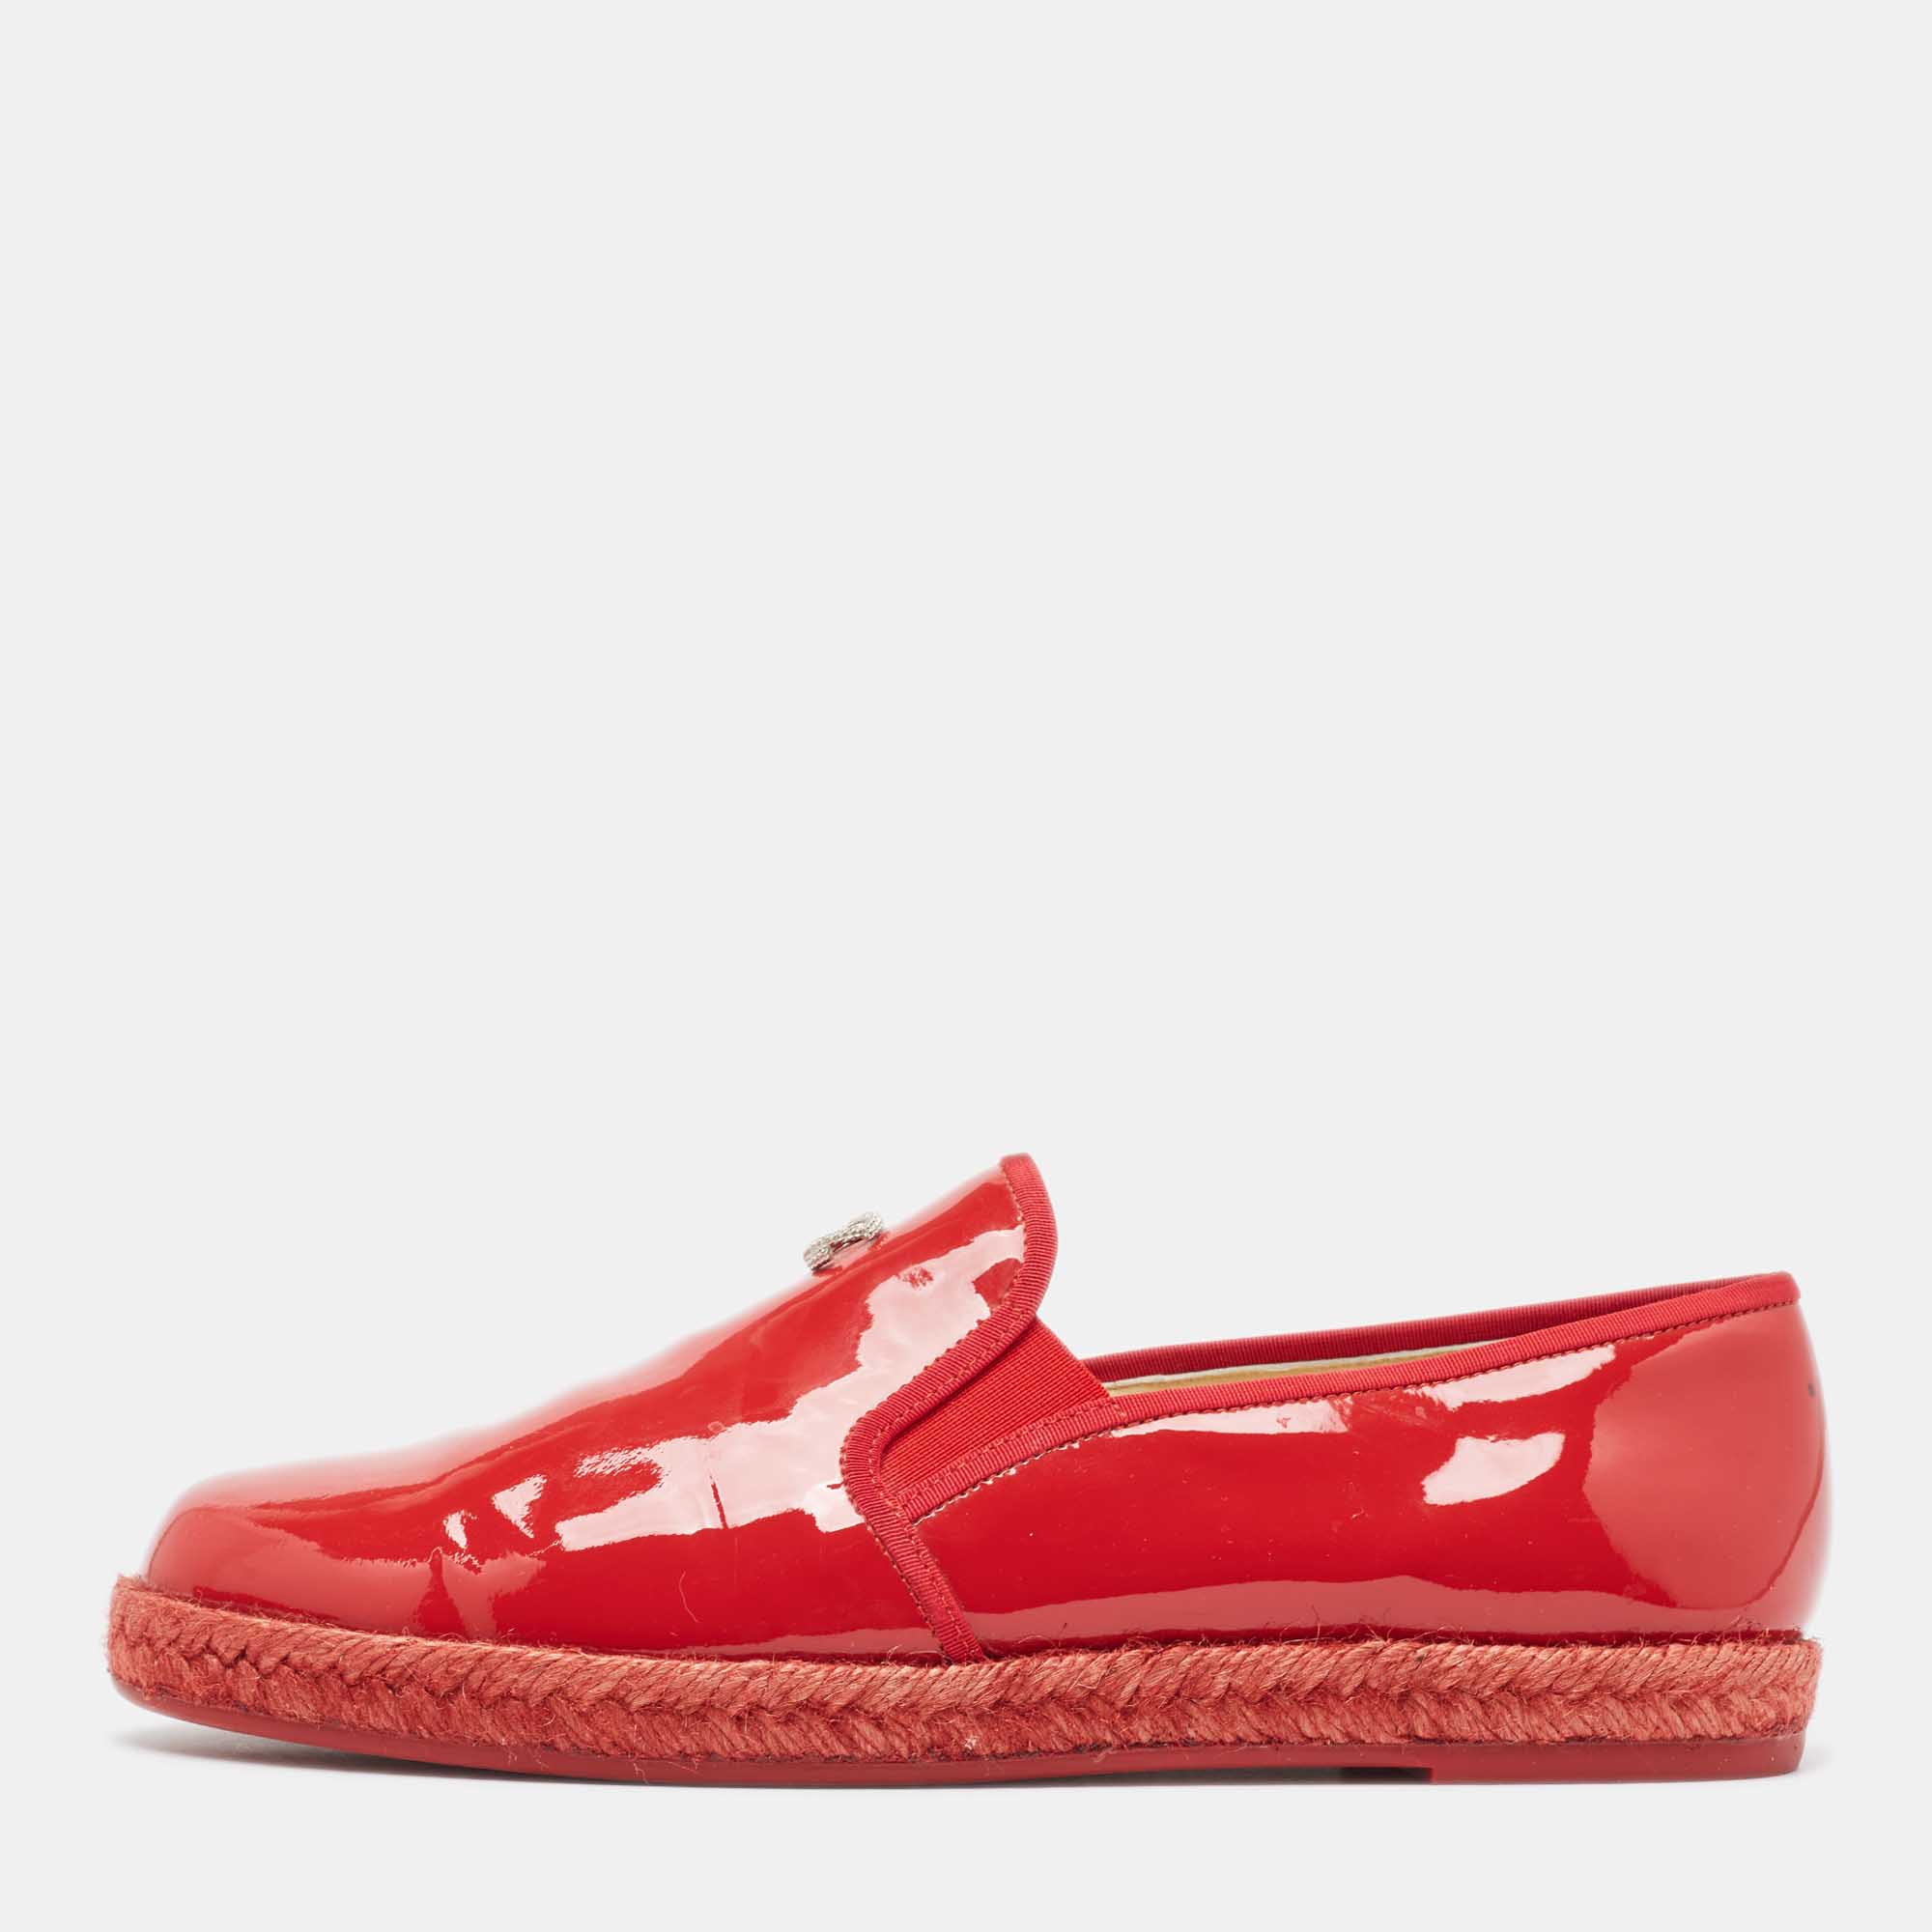 Pre-owned Chanel Red Patent Leather Interlocking Cc Logo Espadrille Size 38.5